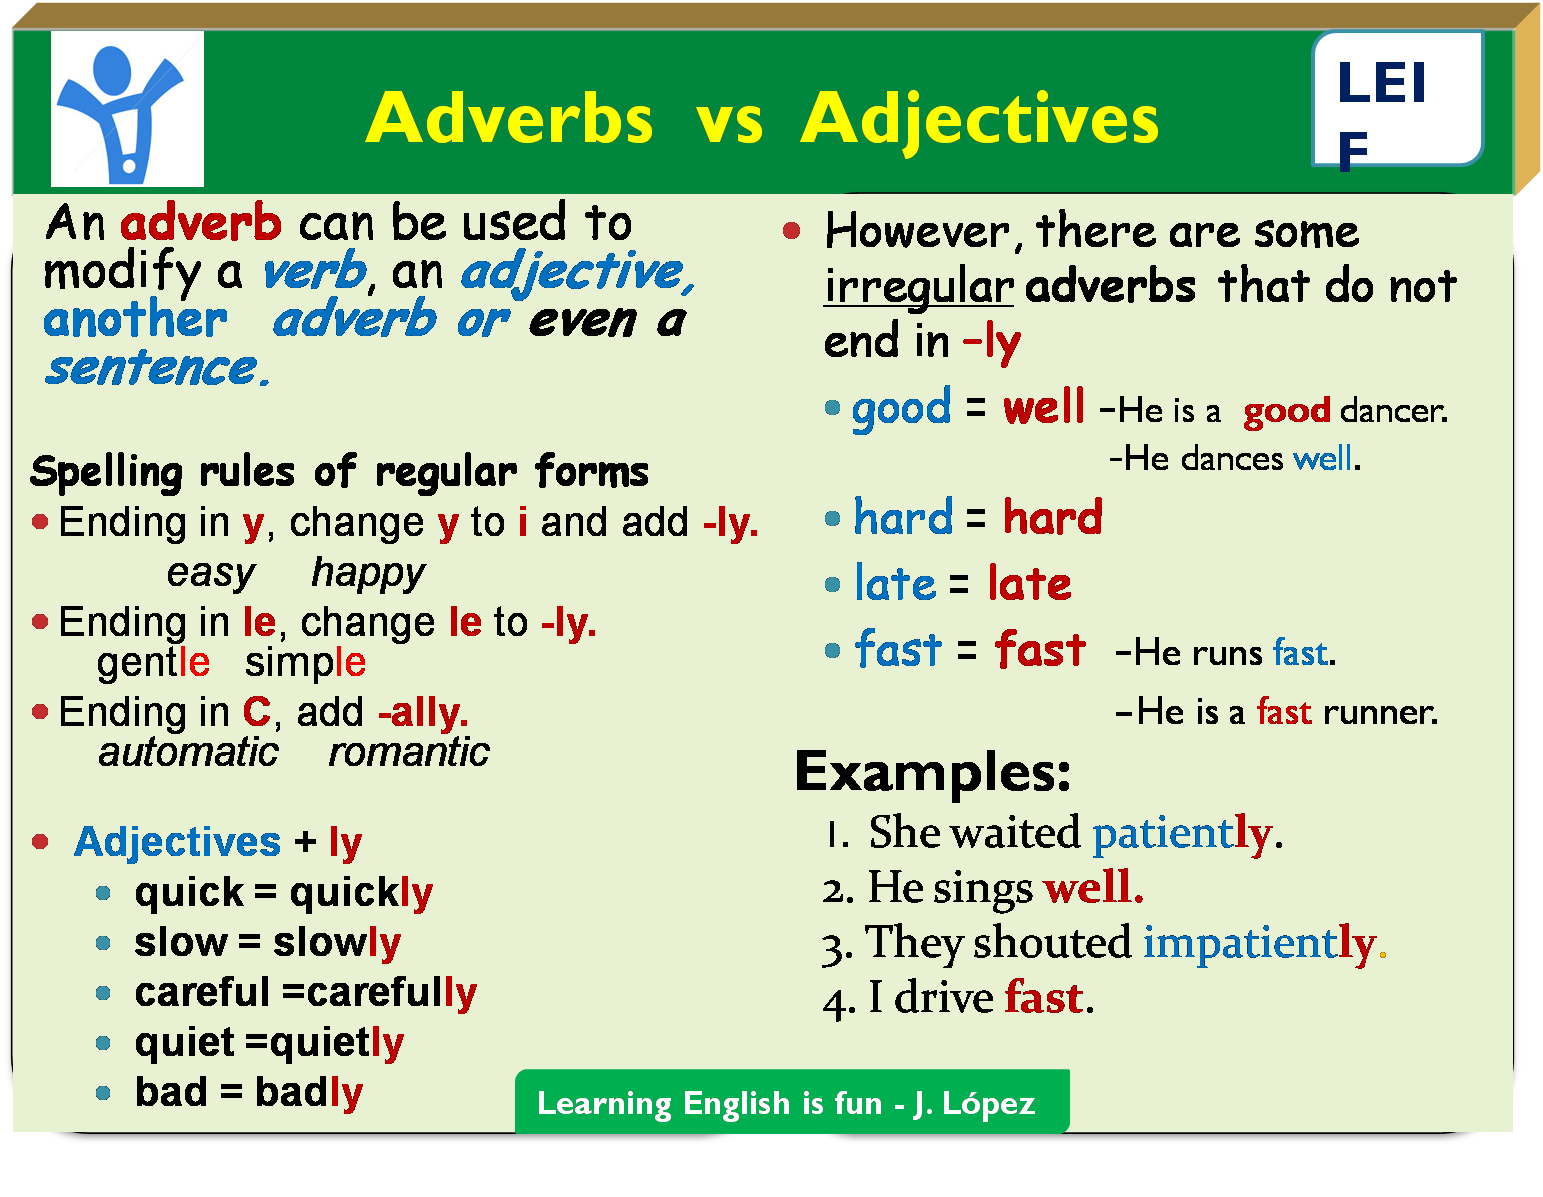 Comparative quiet. Adverbs and adjectives правила. Adjectives and adverbs правило. Adverbs from adjectives правило. Adverbs правило.